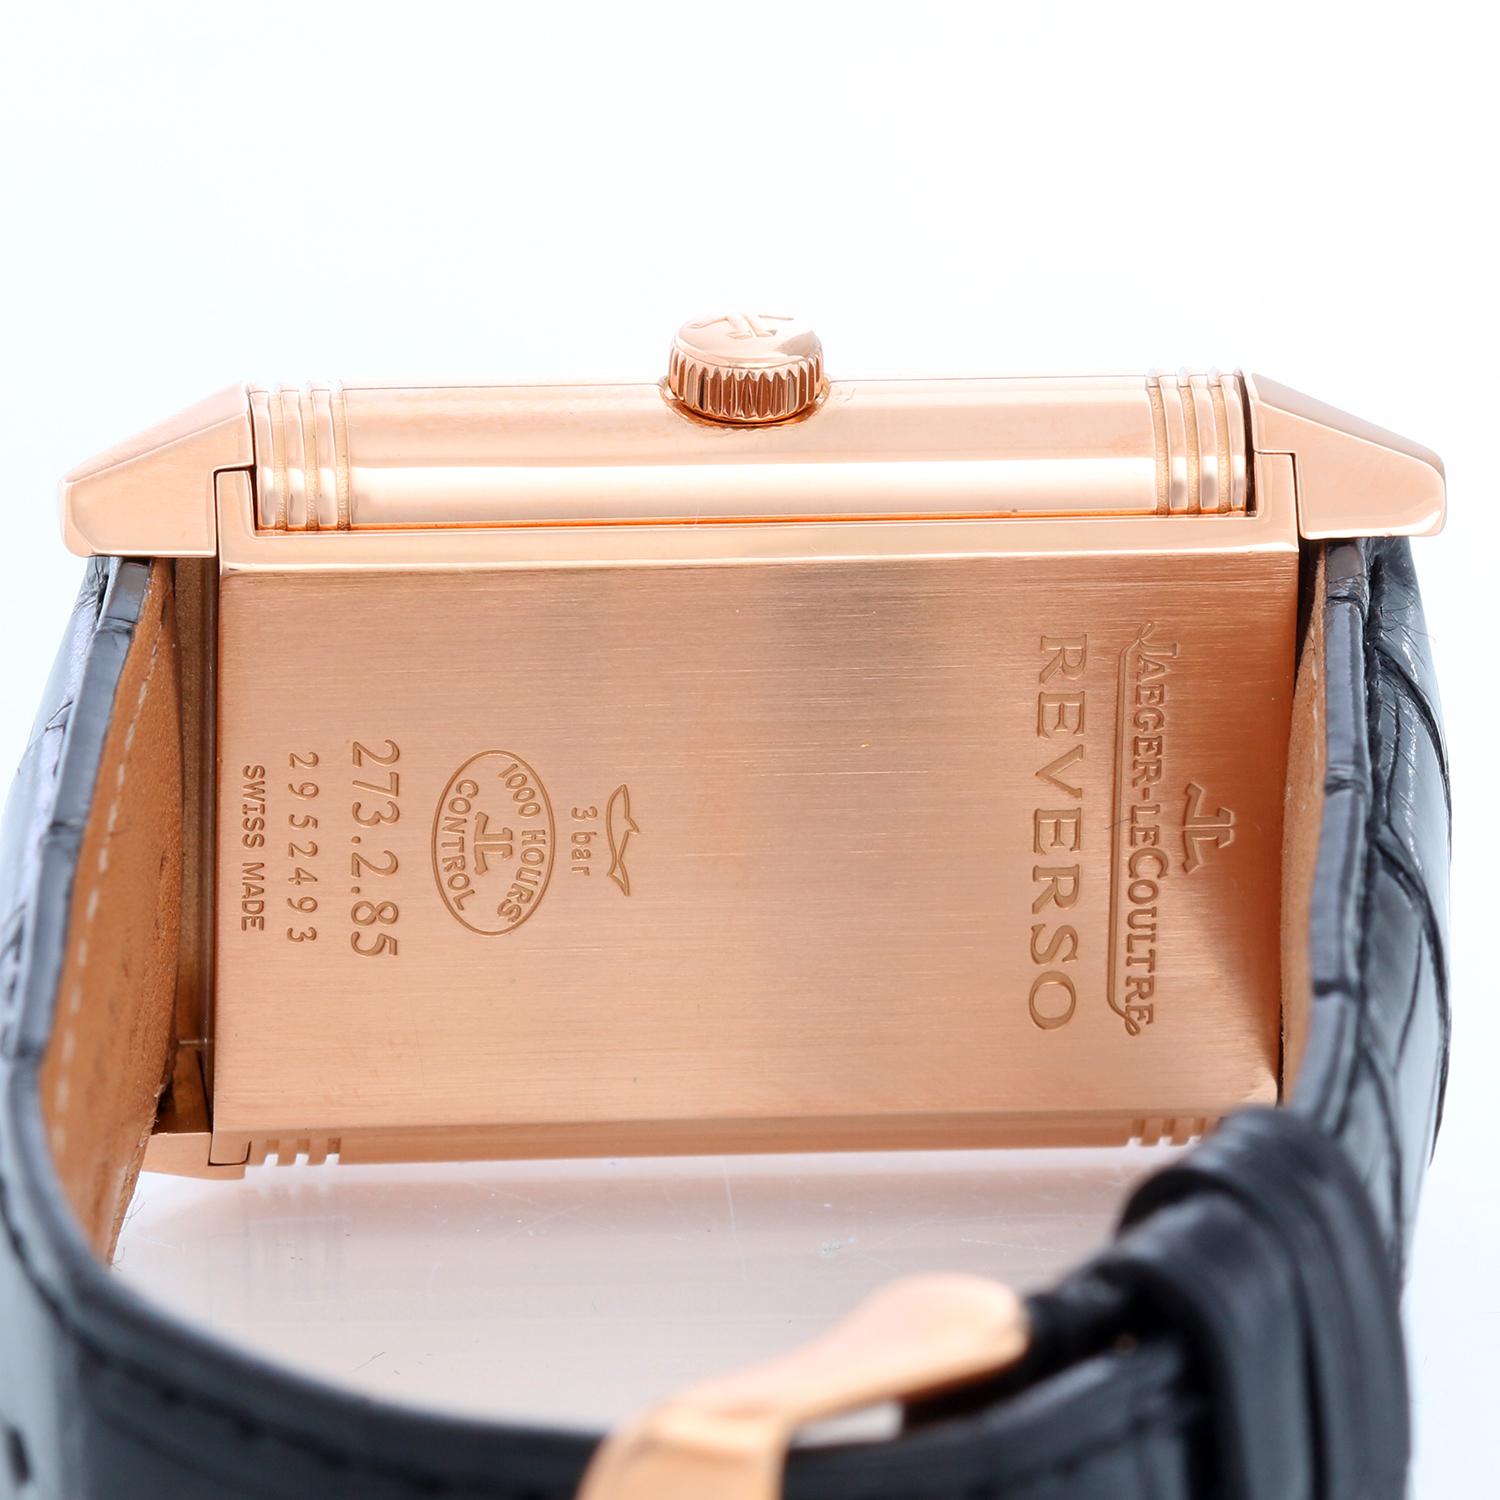 Jaeger LeCoultre Reverso Grande Duo Rose Gold Watch Q3742521 2